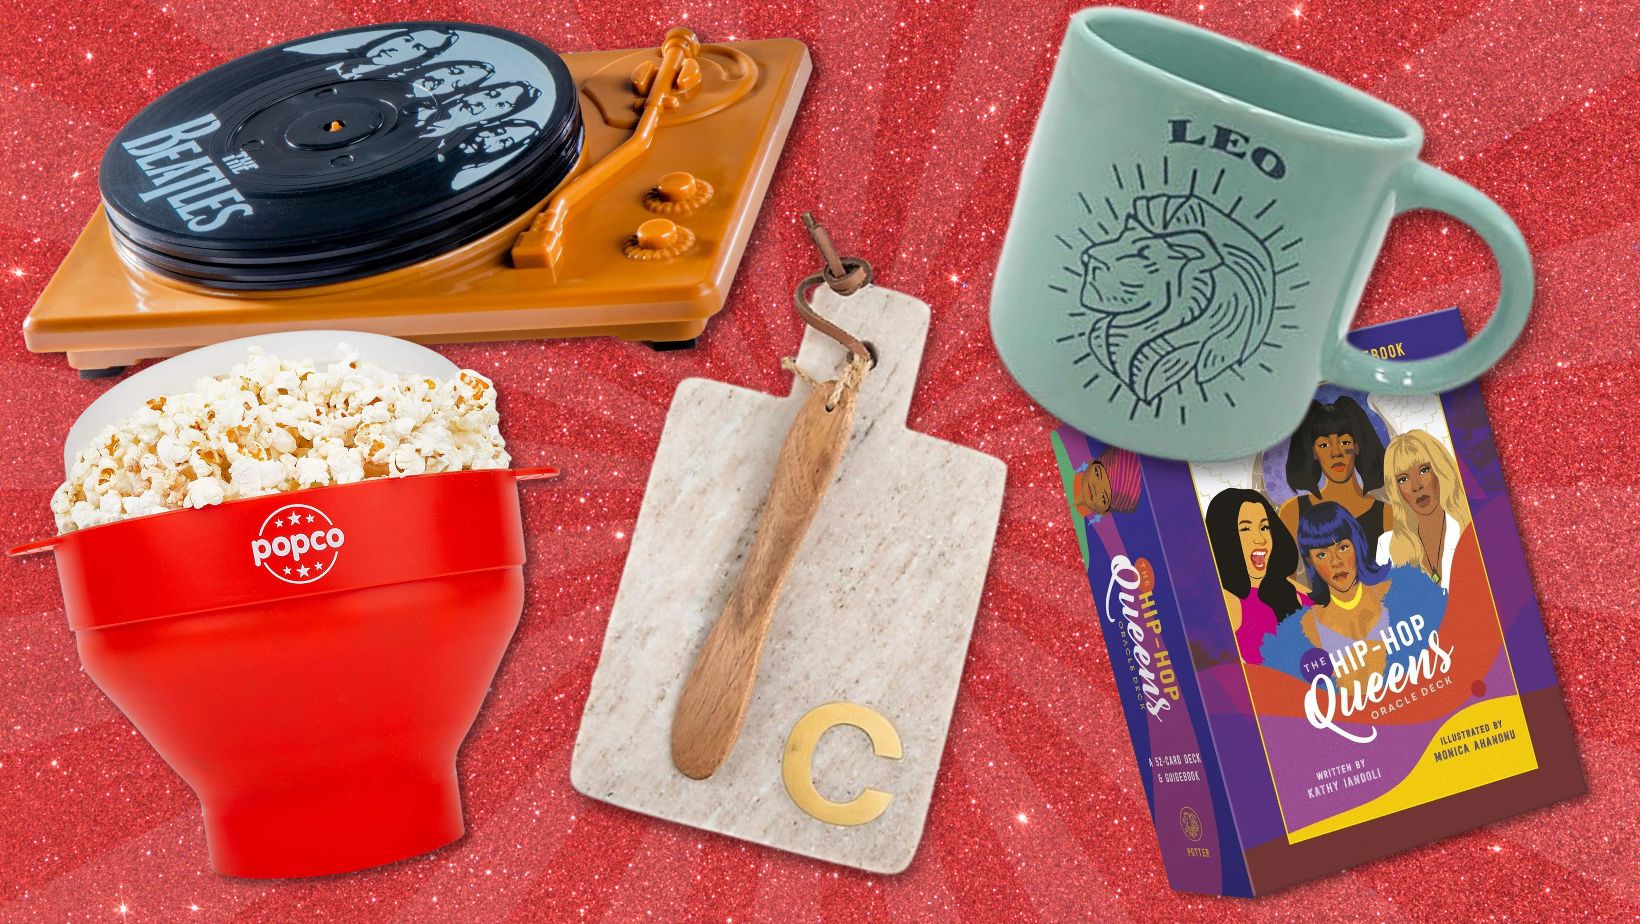 35 Best Secret Santa Gifts Under 25 For Coworkers And Friends